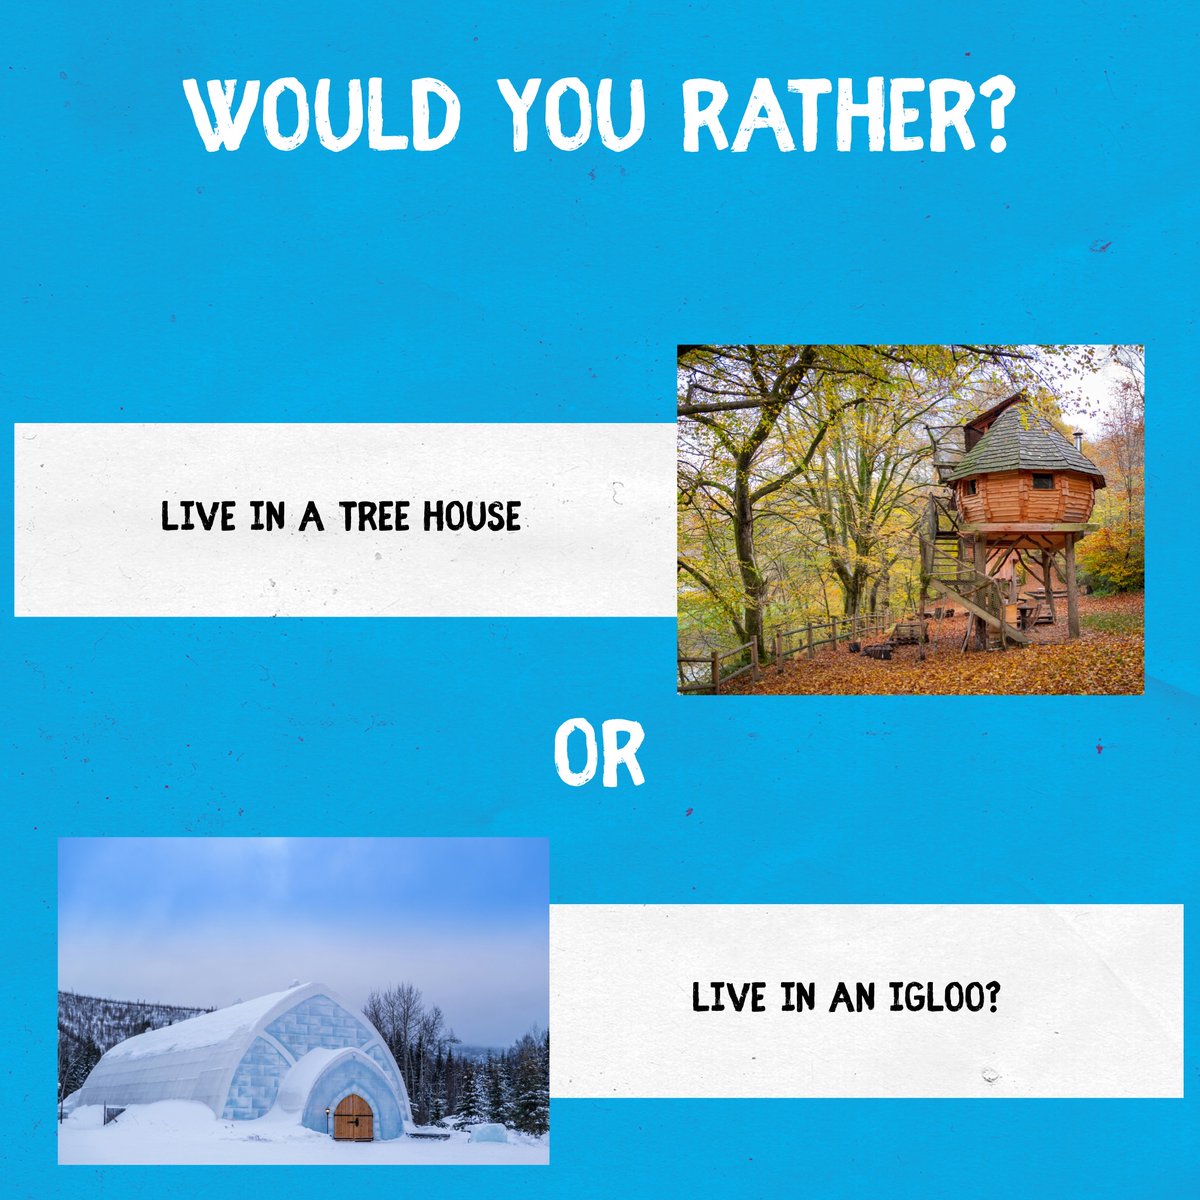 Which would you prefer?  Let us know in the comments! #acop #americanconsumeropinion #surveysformoney #wouldyourather #wouldyouratherquestions #treehouse #igloo